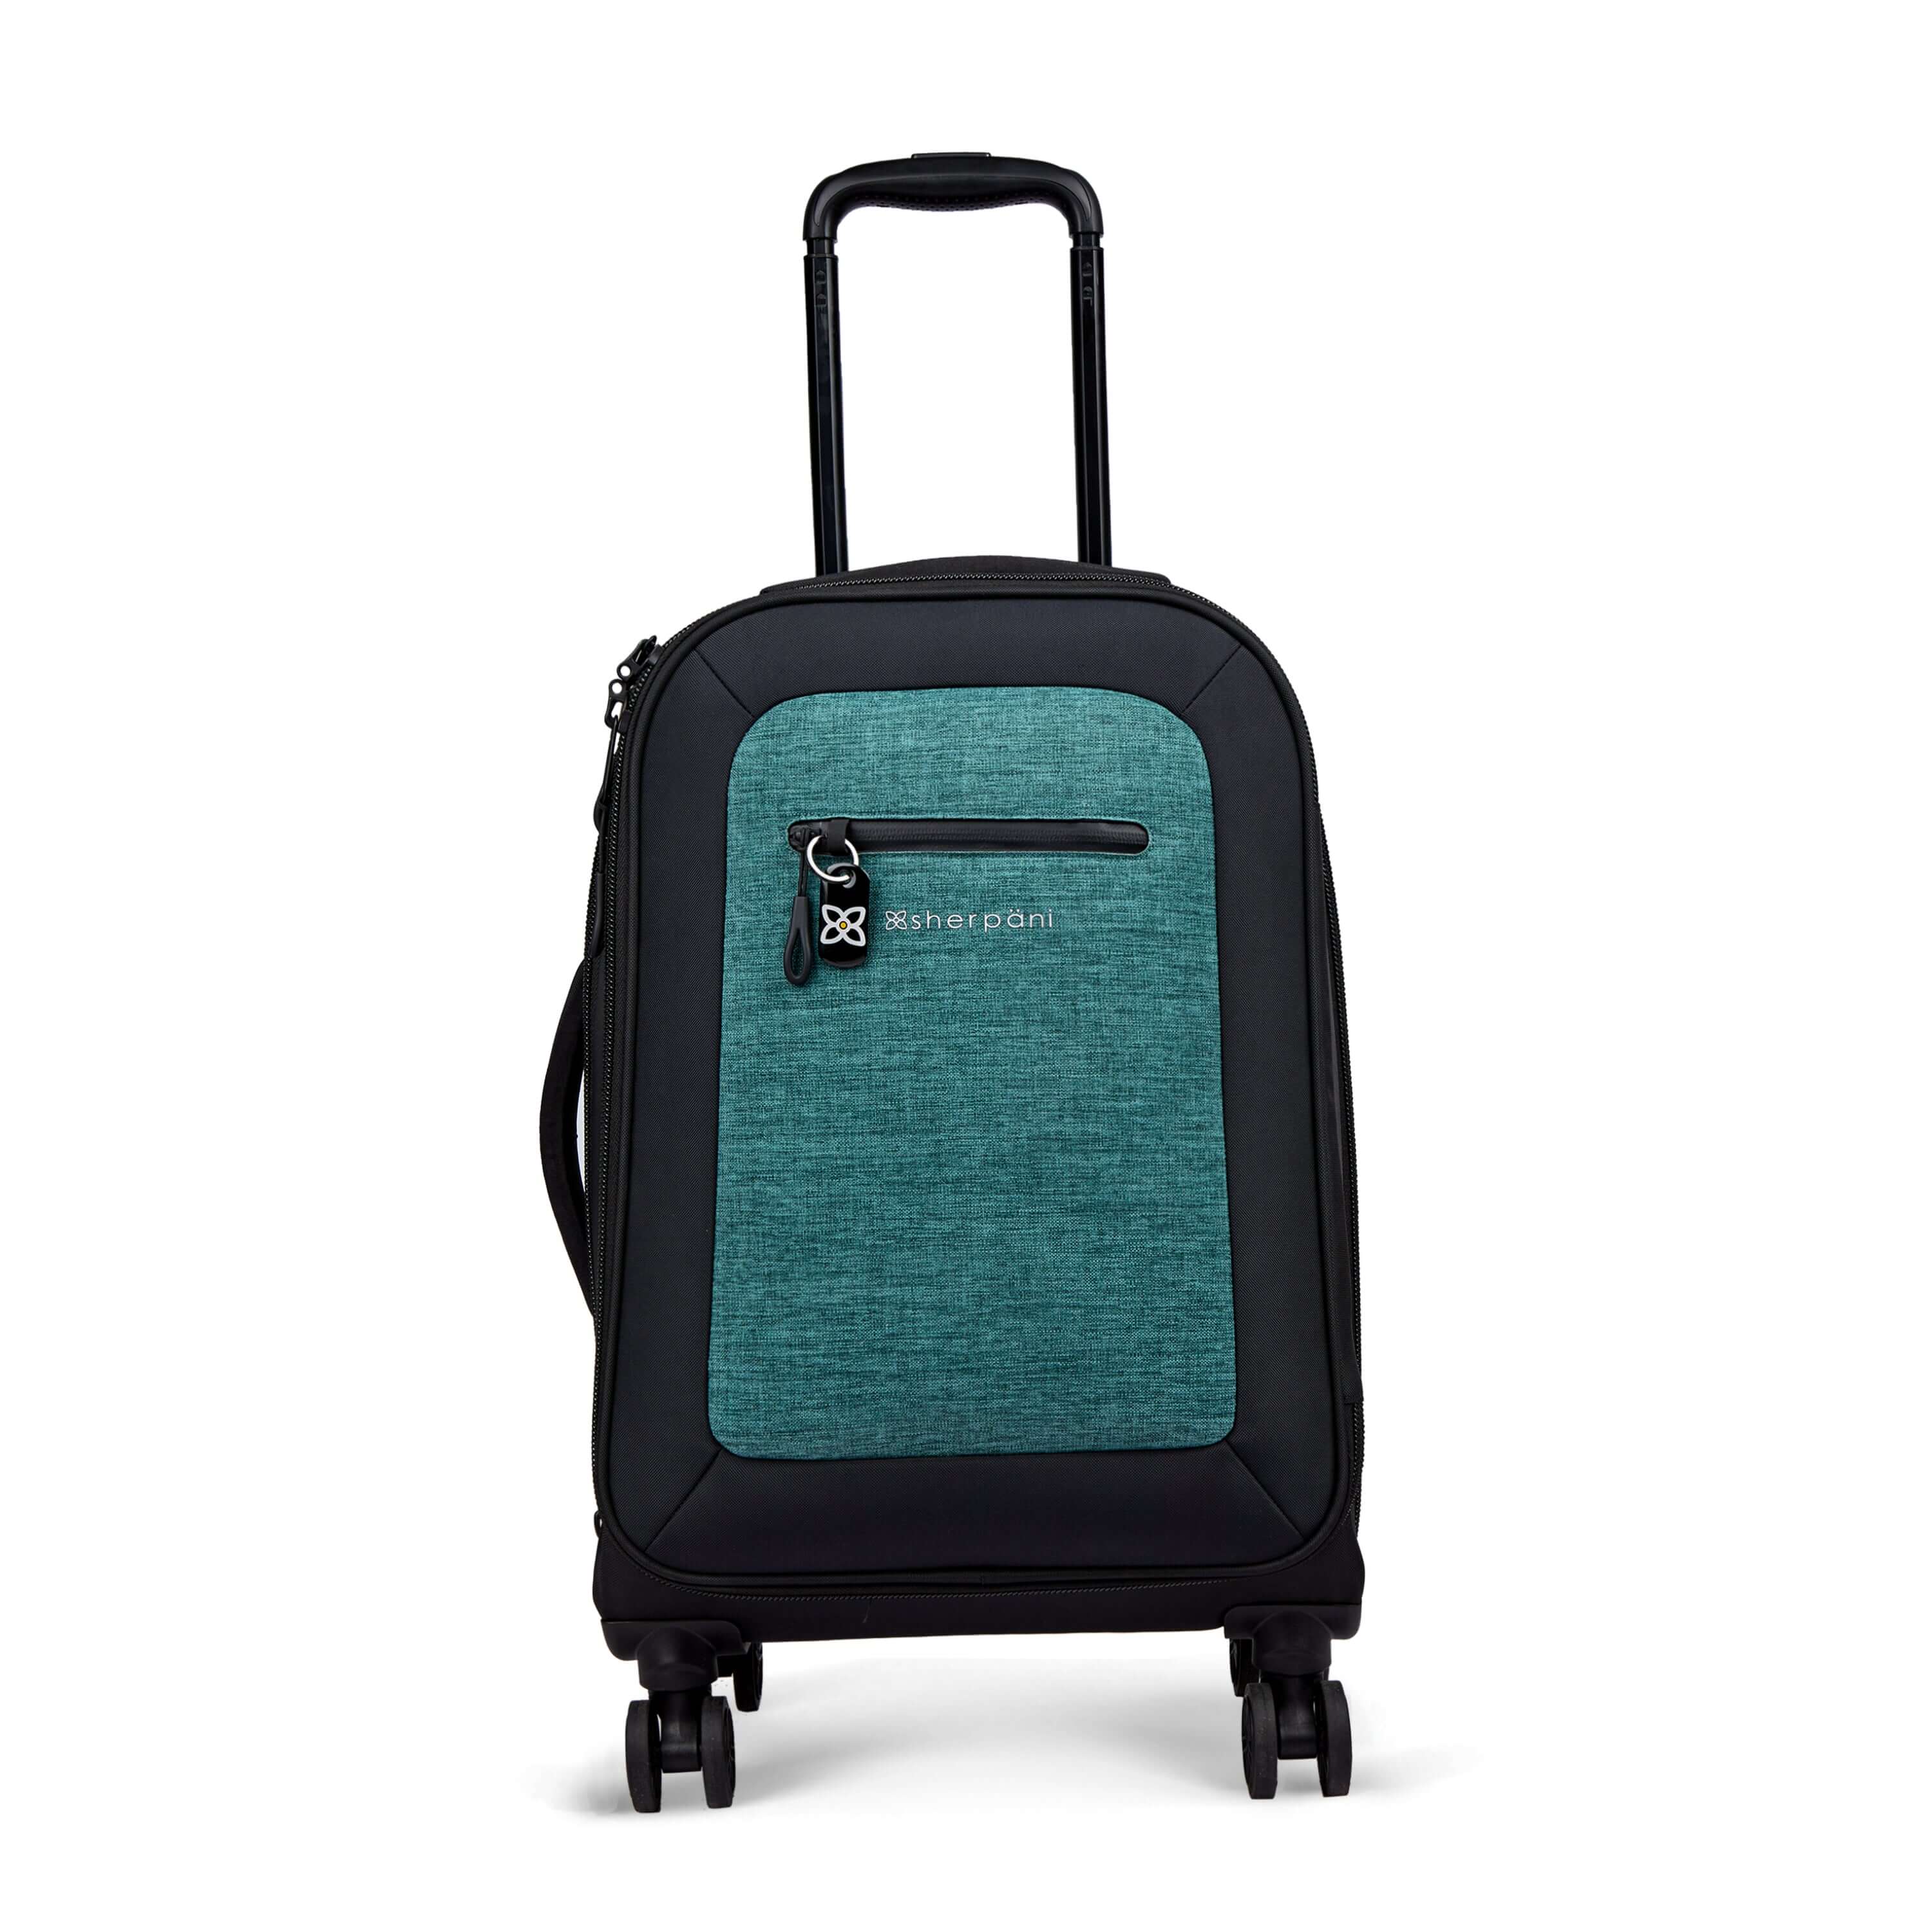 Flat front view of Sherpani’s Anti-Theft luggage the Latitude in Teal. The suitcase has a soft shell exterior made from recycled plastic bottles and features vegan leather accents in black. There is a main zipper compartment, an expansion zipper and an external pocket on the front with a locking zipper and a ReturnMe tag. On the top of the suitcase sits a retractable luggage handle. On the side sits an easy-access handle. At the bottom are four 360-degree spinner wheels for smooth rolling. 